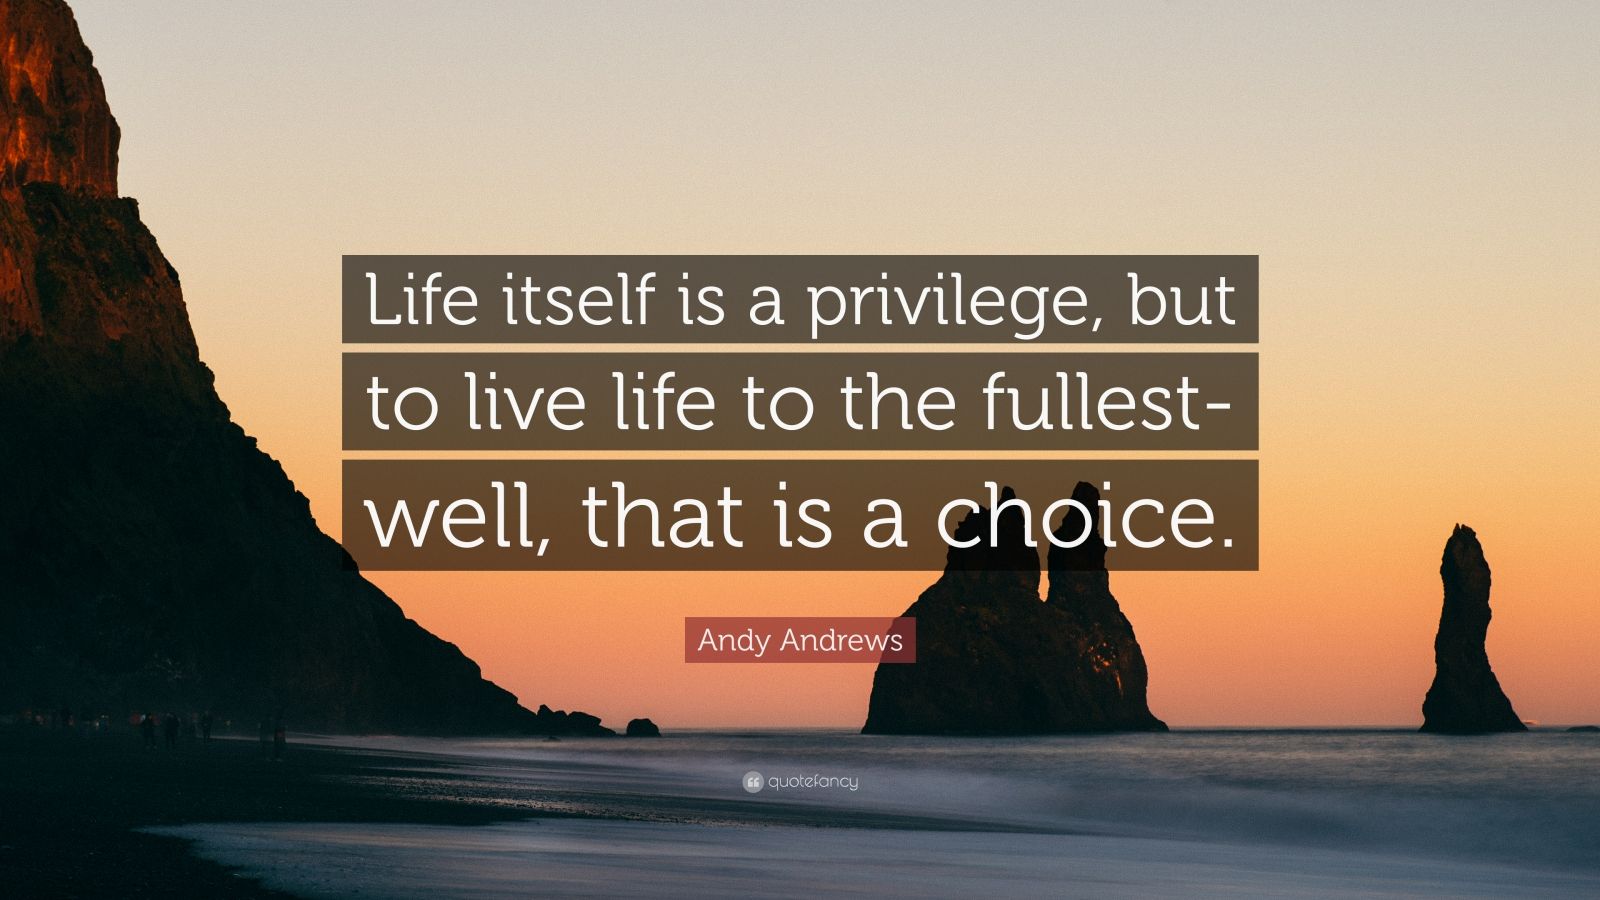 Andy Andrews Quote: “Life itself is a privilege, but to live life to ...